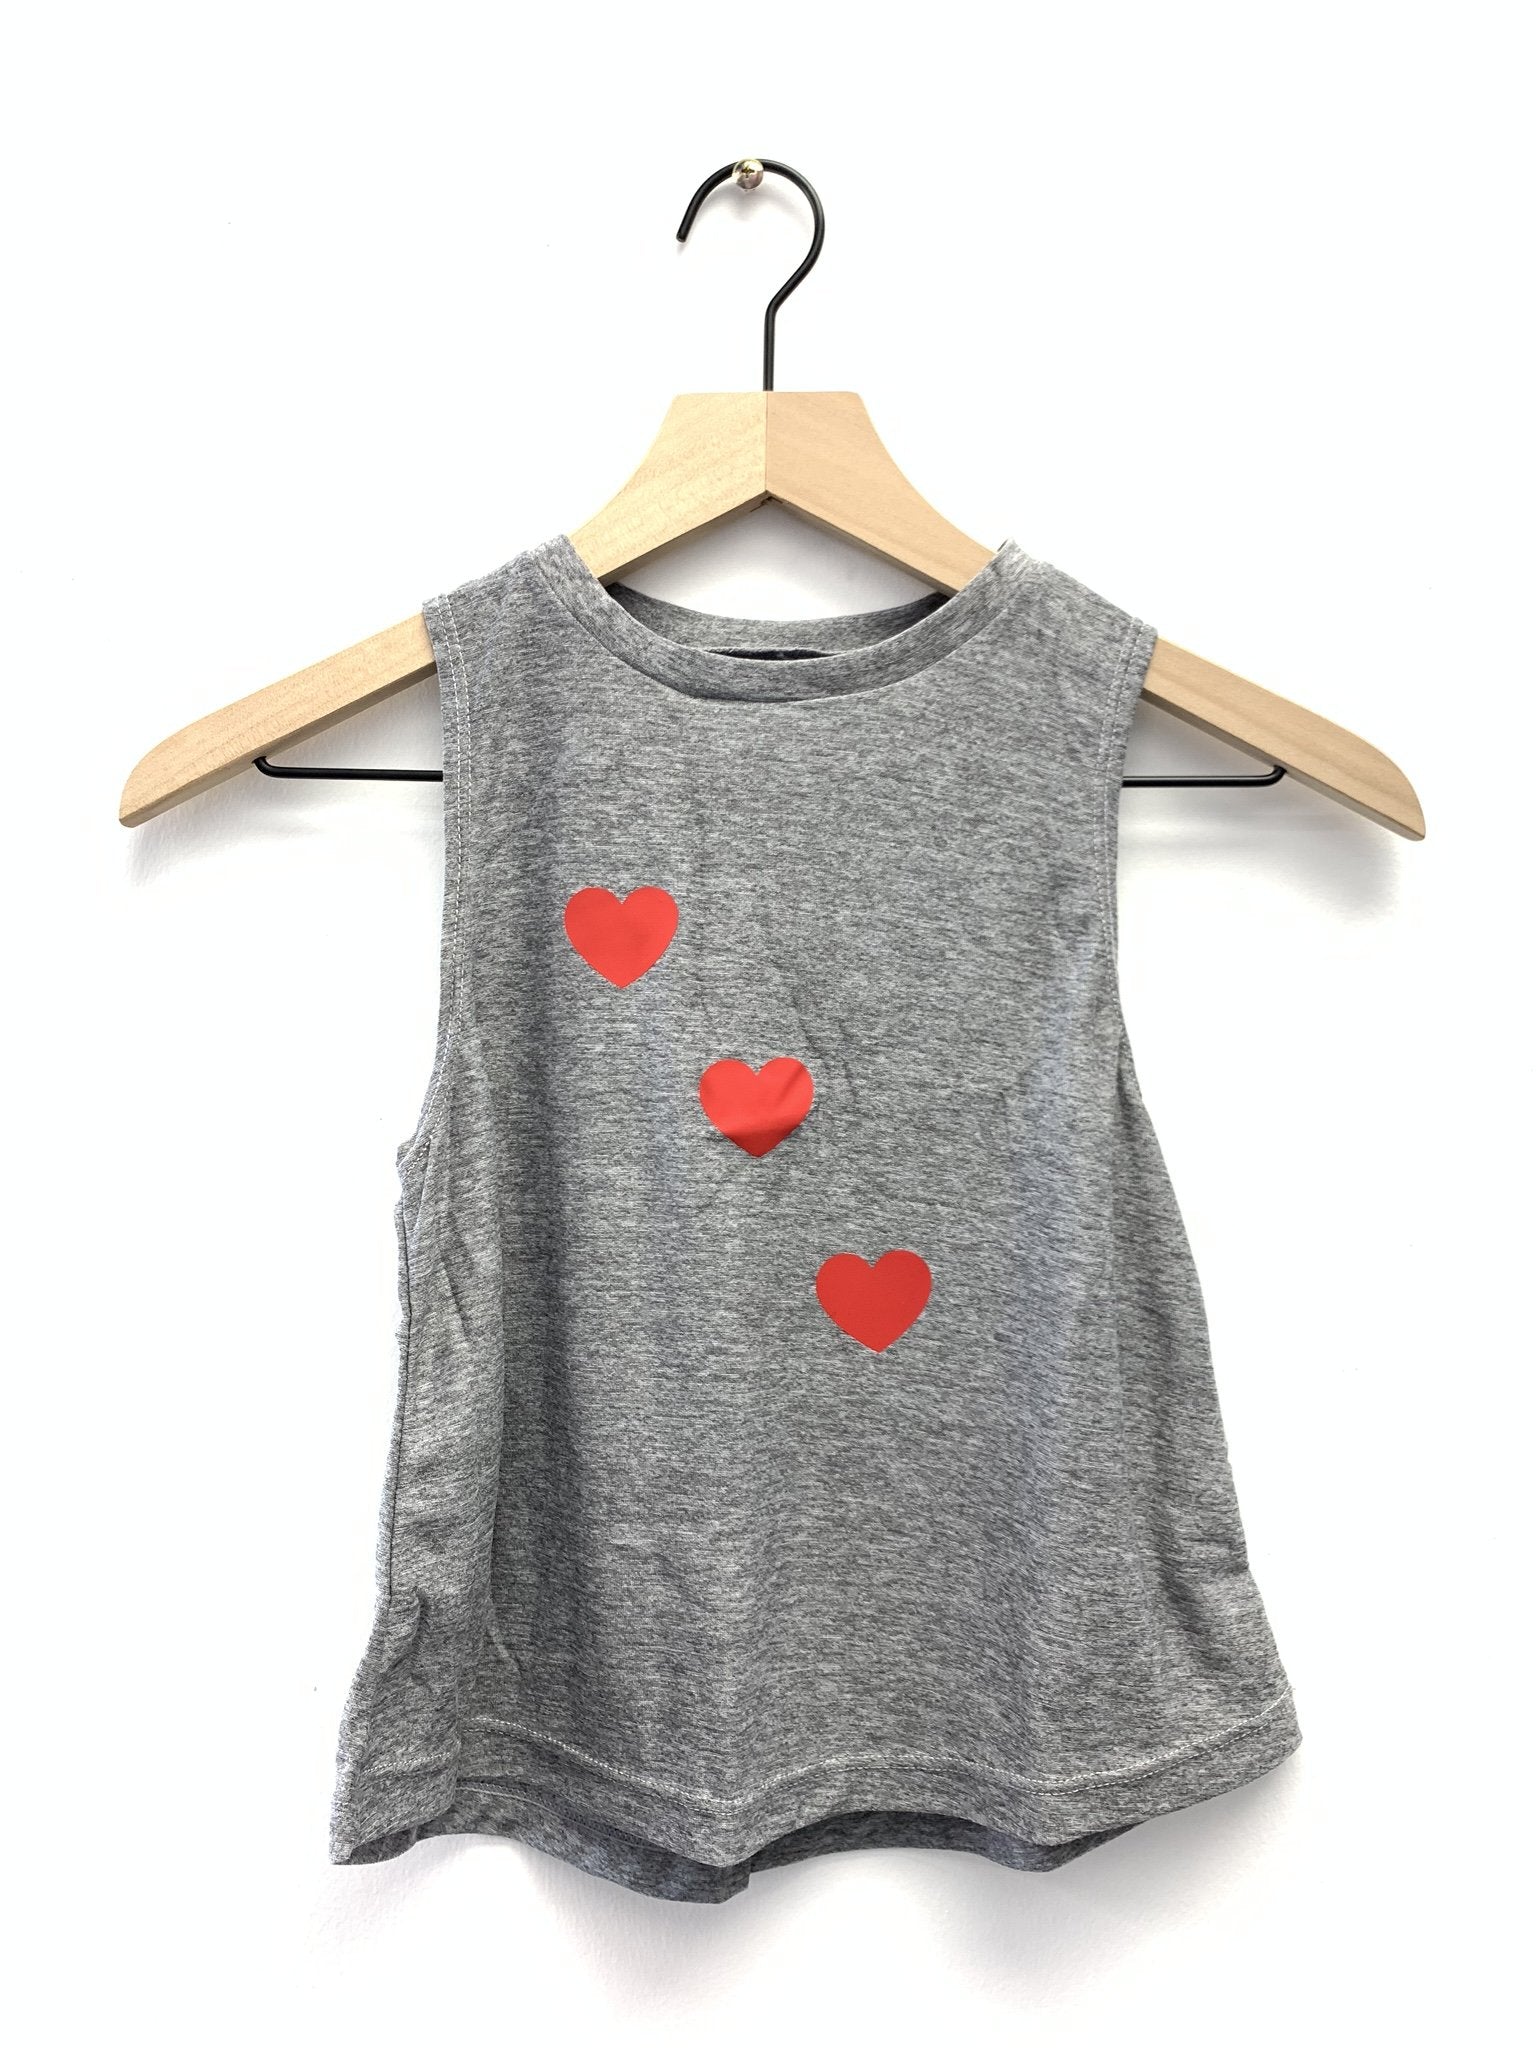 Hearts Red Grey Dry Fit Sleeveless Kids Girl's Tank